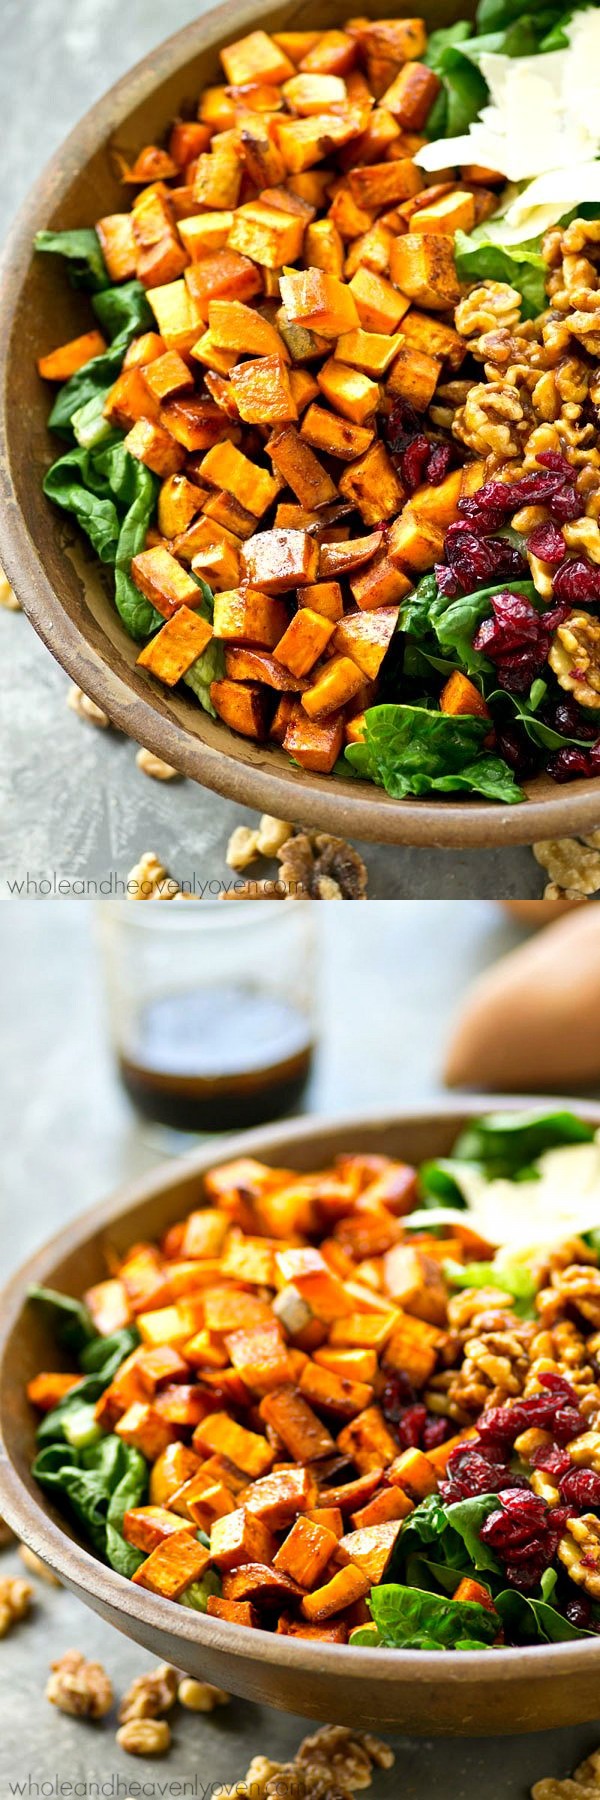 Moroccan Sweet Potato Salad with Candied Walnuts + Maple Dressing